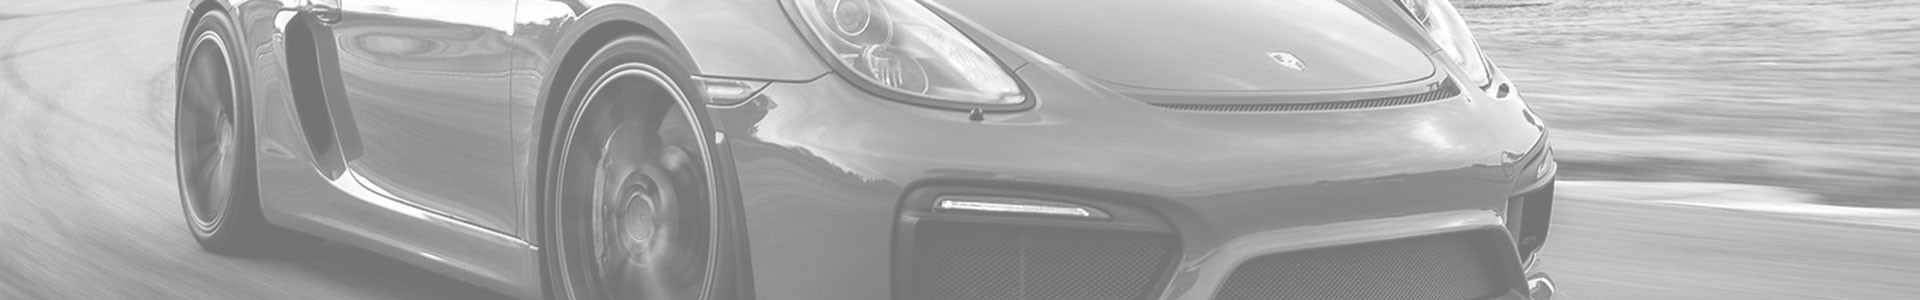 porsche cayman used car buyers guide